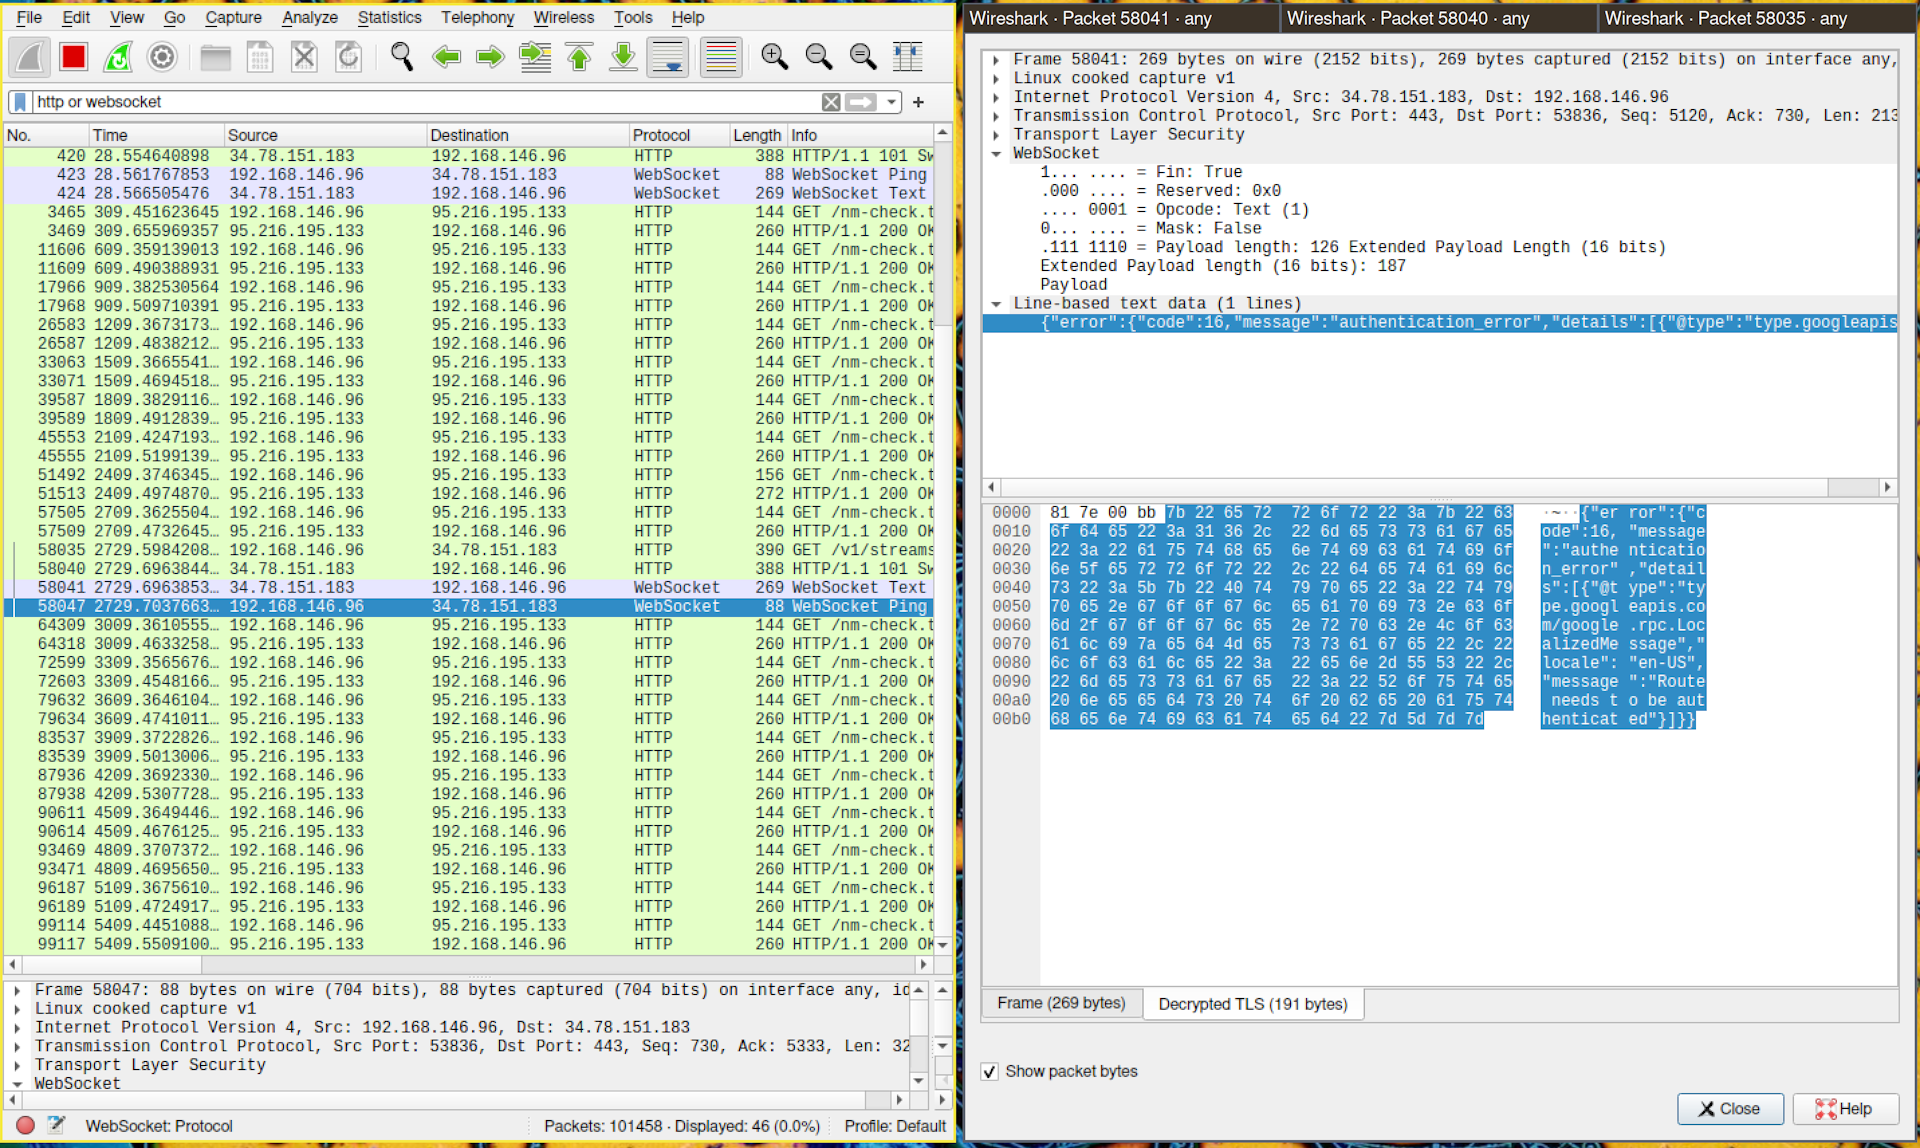 Screenshot of wireshark successfully showing decrypted traffic on the host